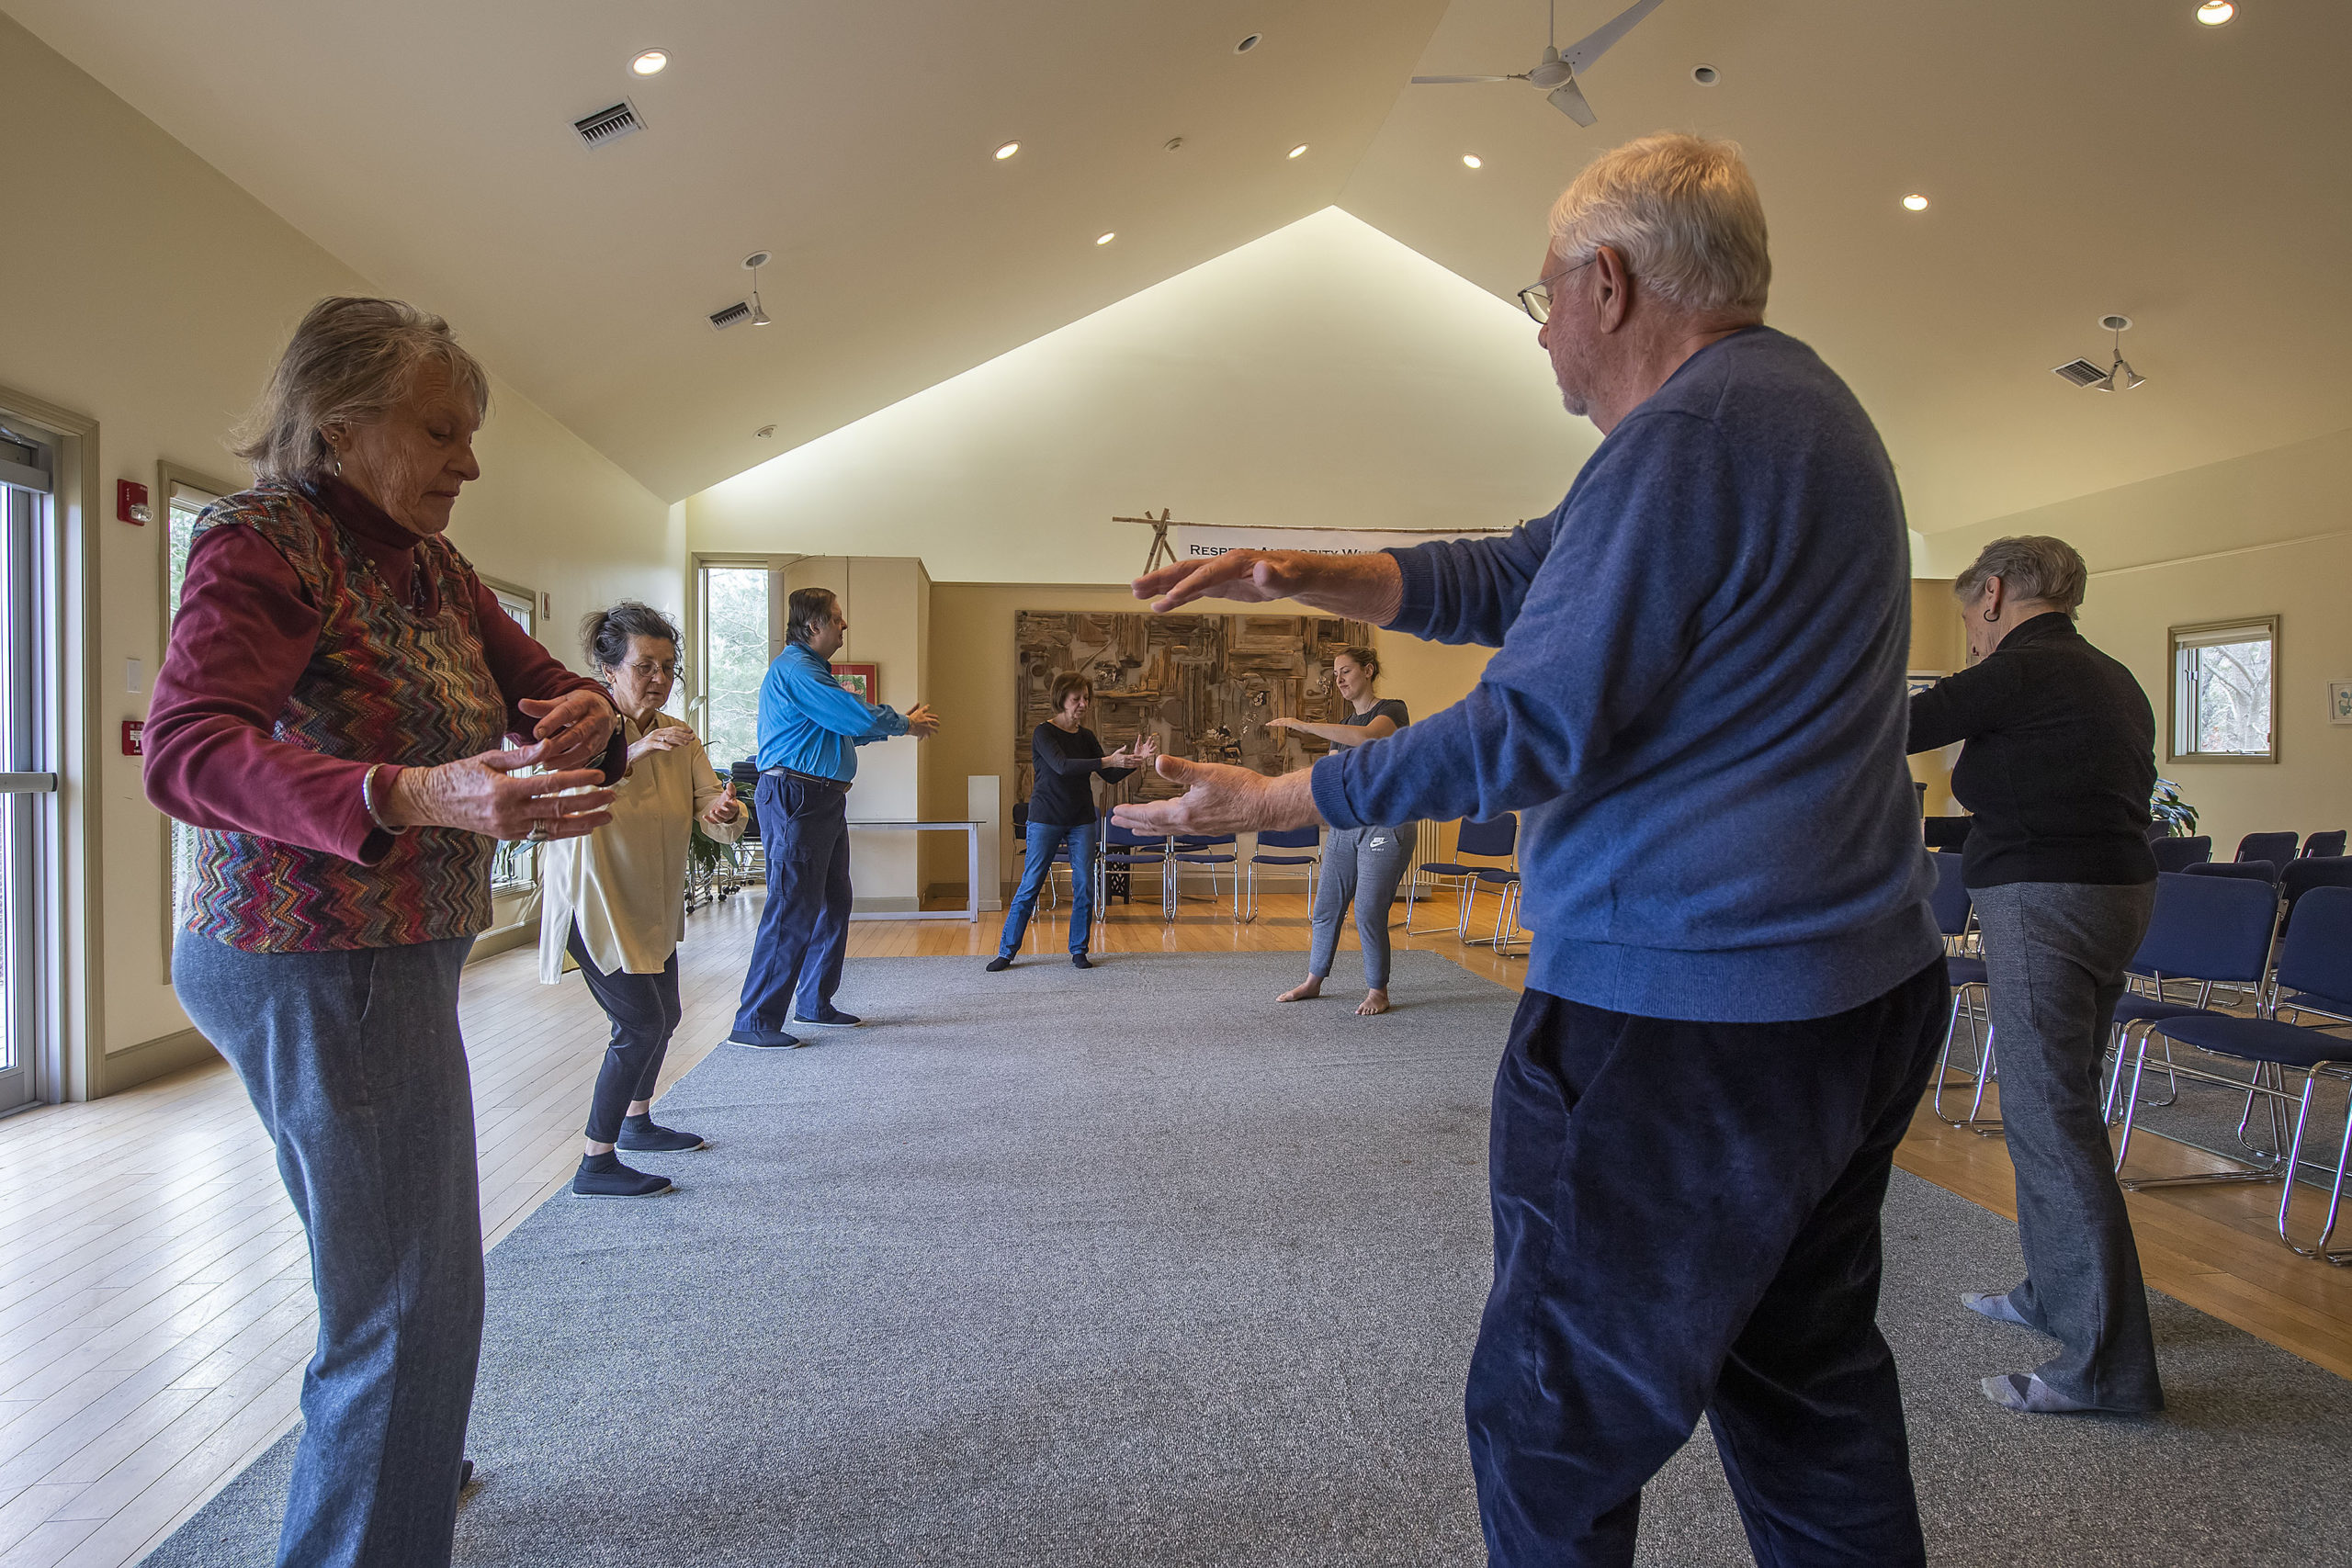 Instructors Tina Curran and Steve Flores, second and third from left, lead a small group as they practice Qi Gong at the Universalist Unitarian Church of the Hamptons on Sunday, January 12.  MICHAEL HELLER